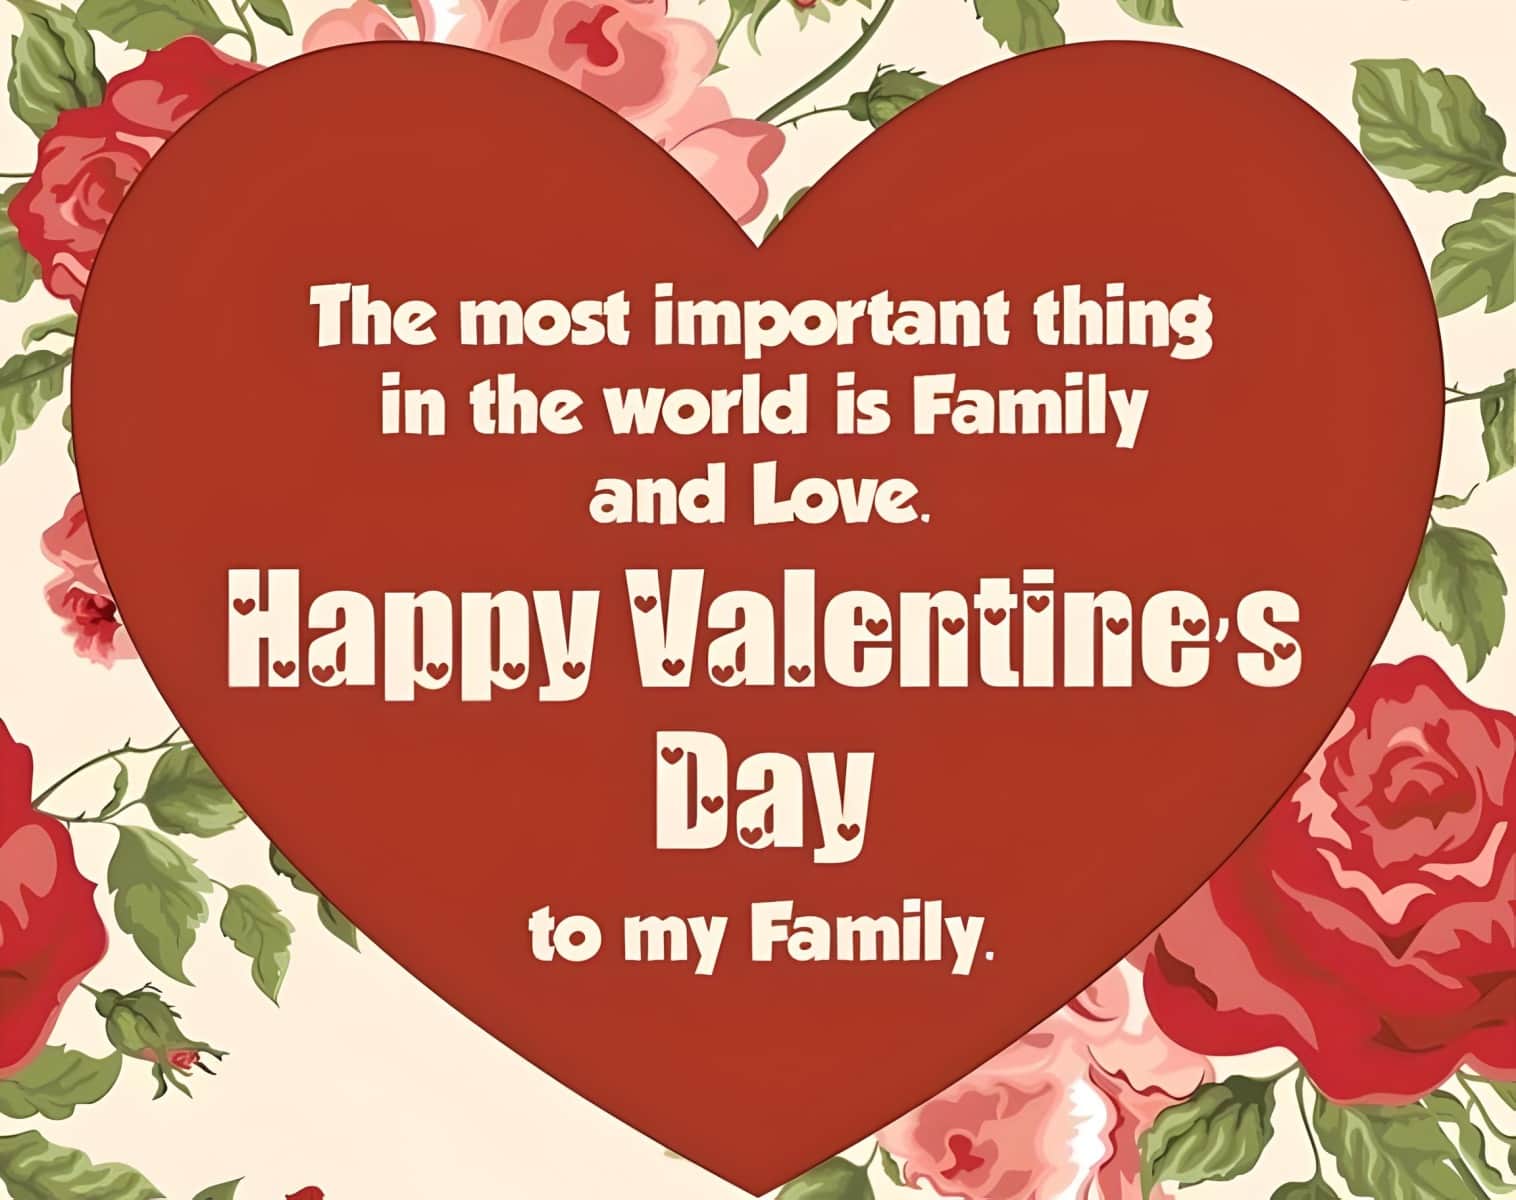 Valentine's Day Messages for Families